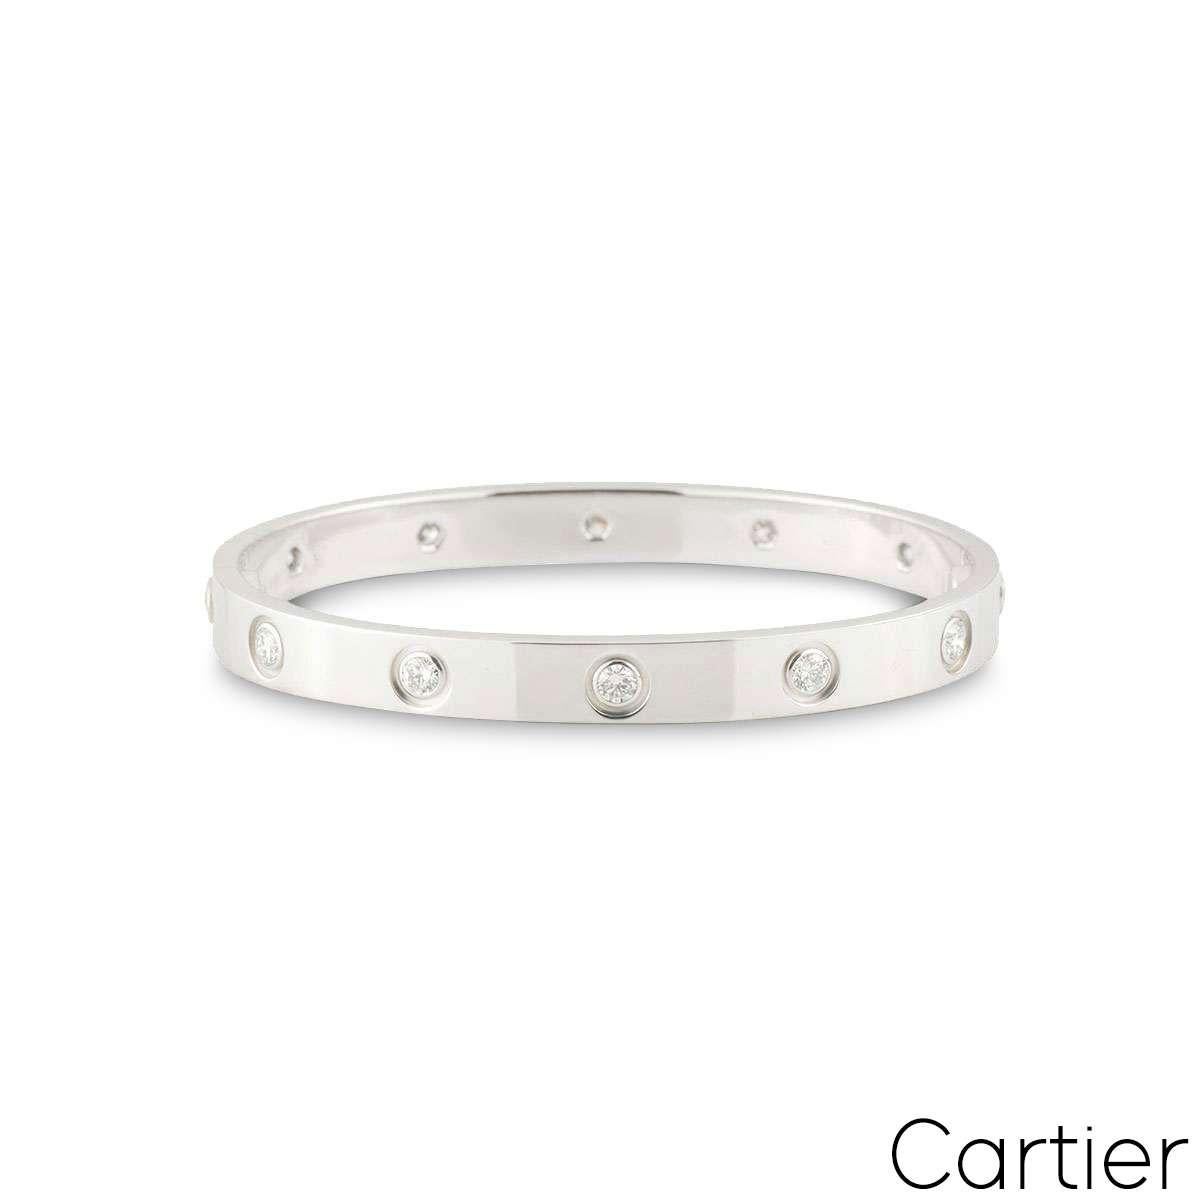 An 18k white gold full diamond Cartier bracelet, from the Love collection. The bracelet is set with 10 round brilliant cut diamonds circulating the outer edge in a rubover setting. This bracelet is size 17, features the new style screw fitting and